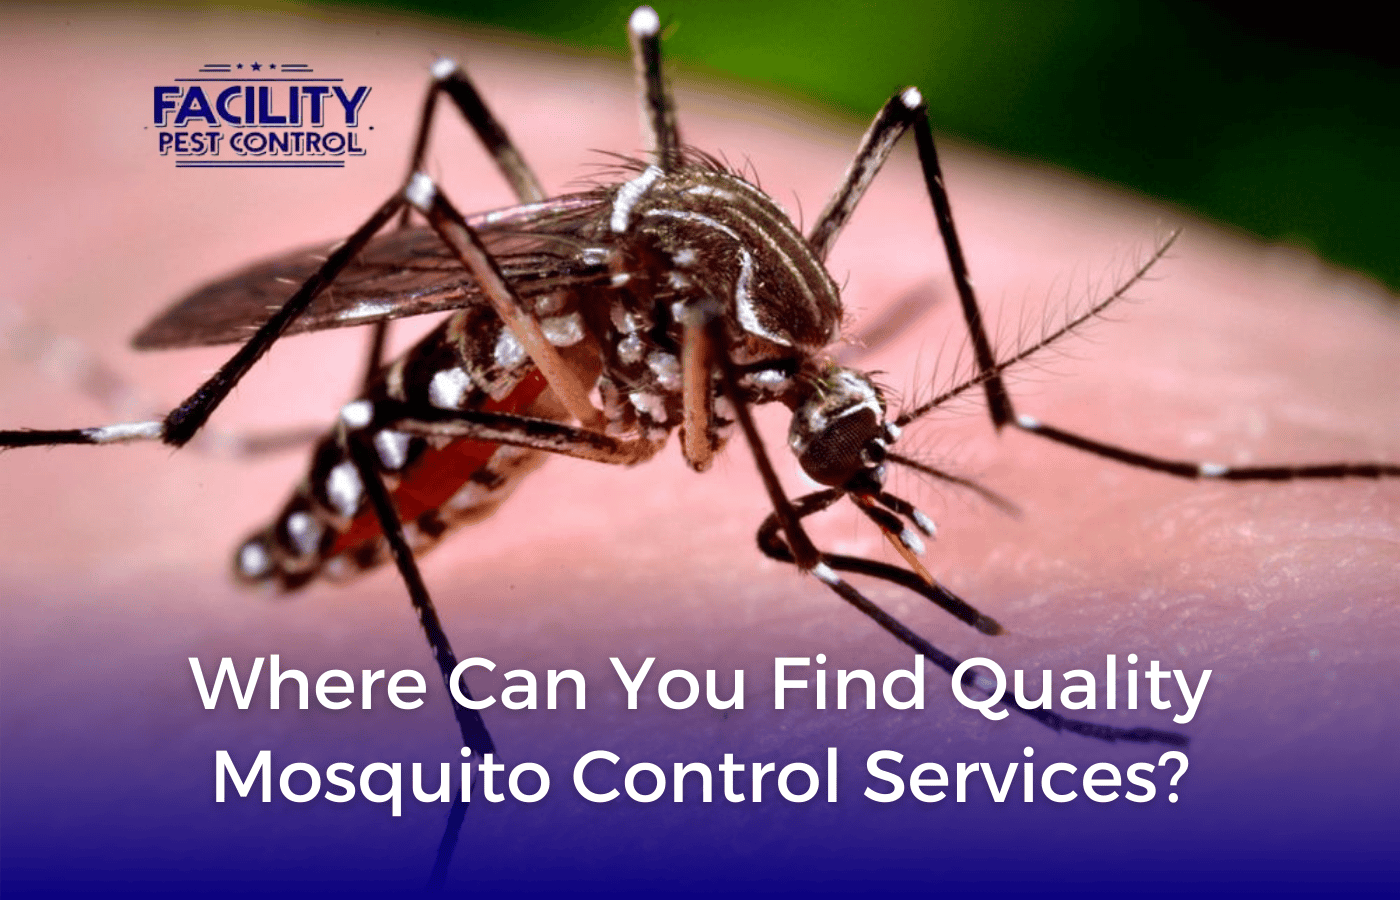 Where Can You Find Quality Mosquito Control Services?